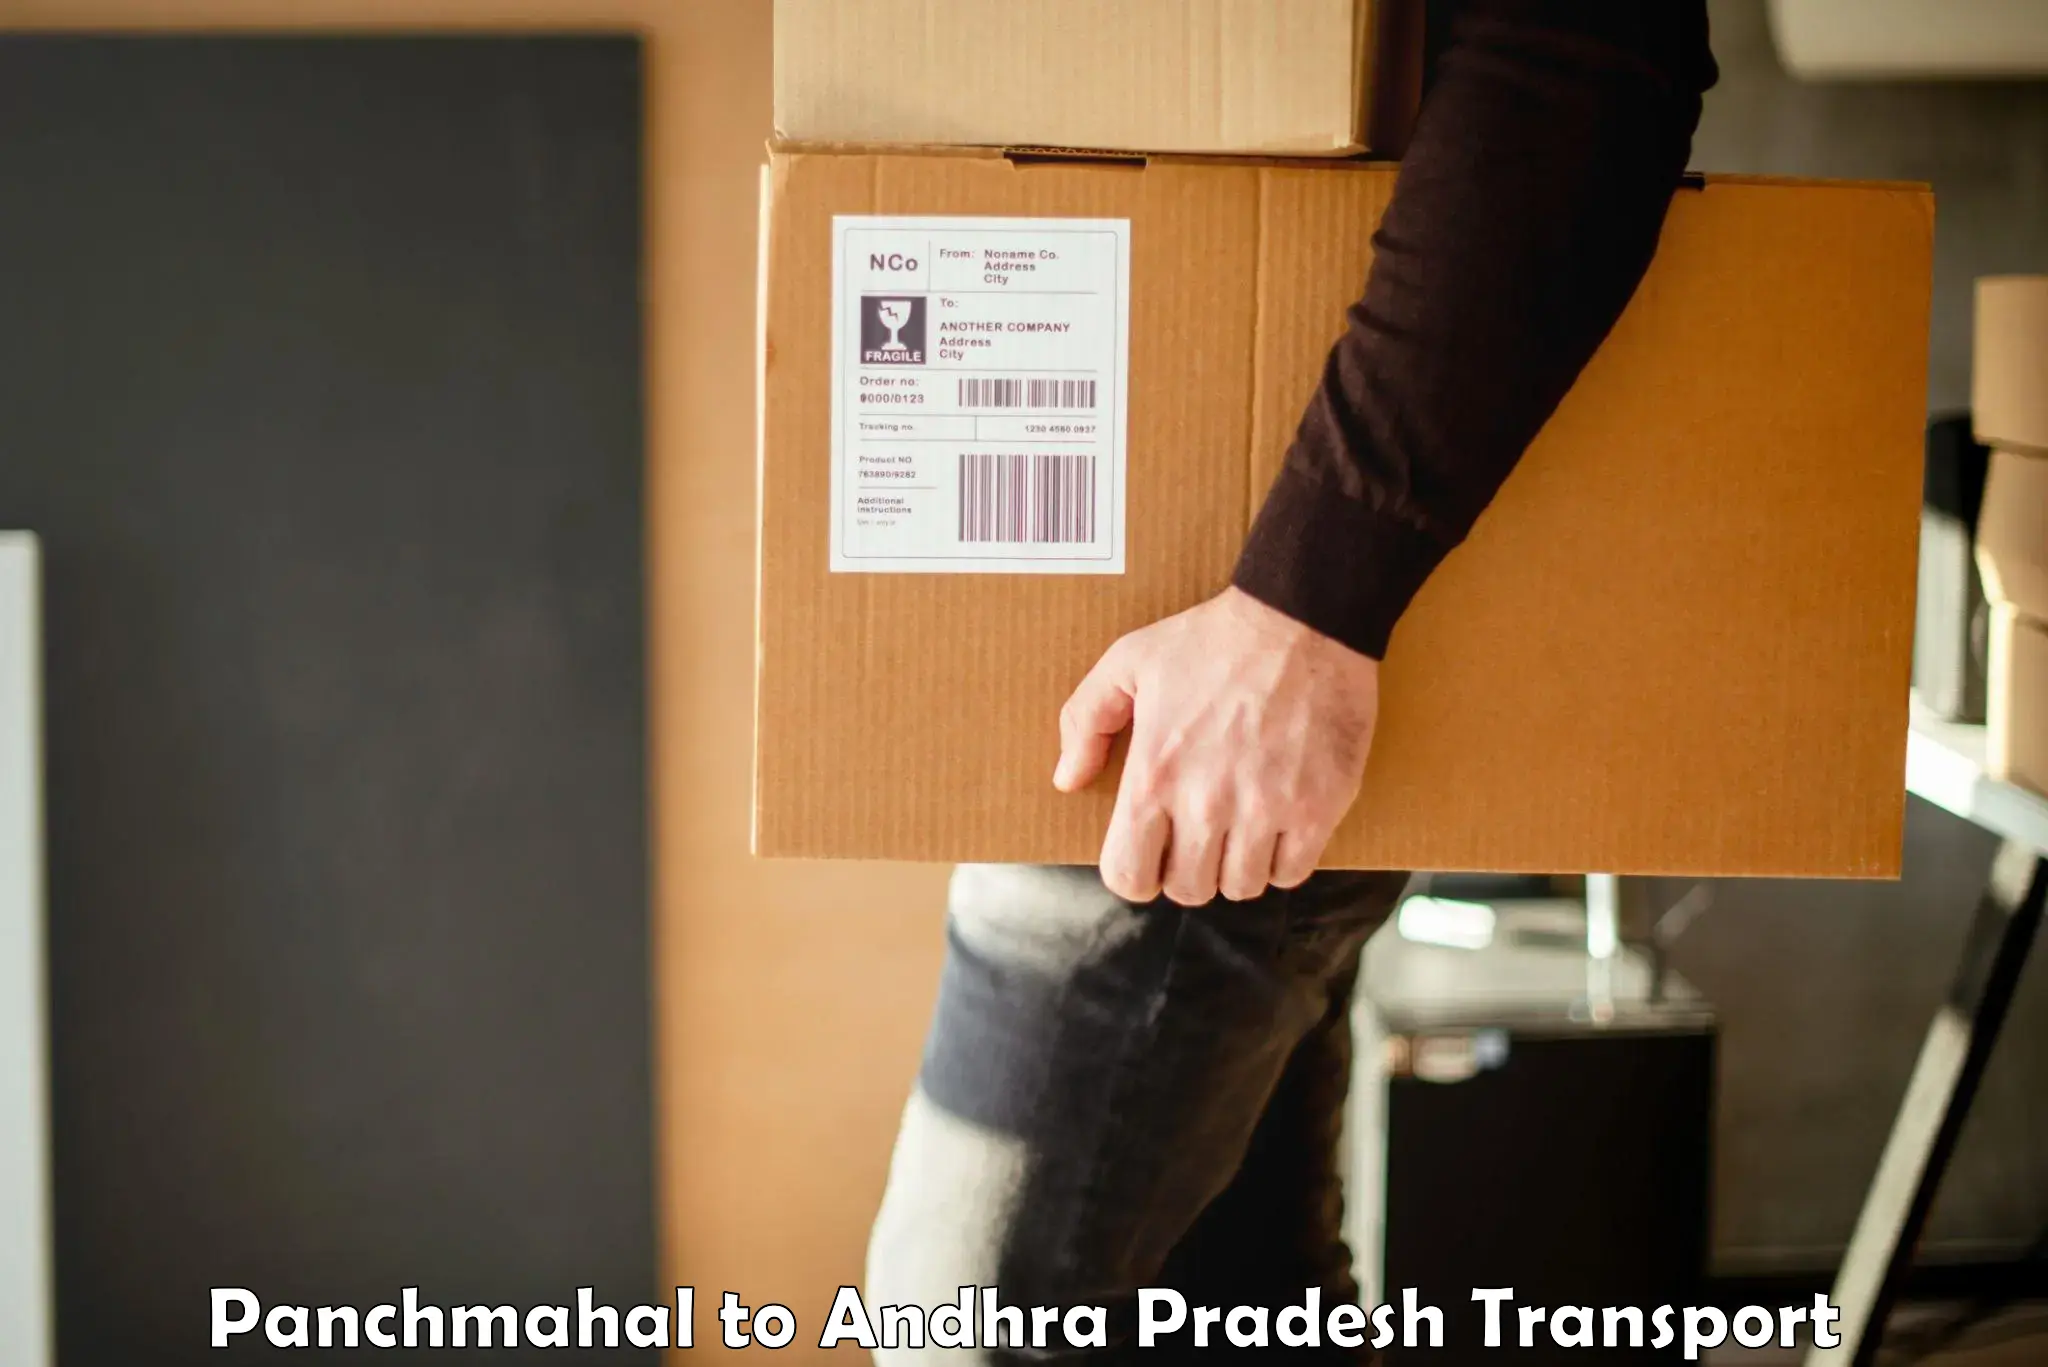 Delivery service Panchmahal to Hindupur